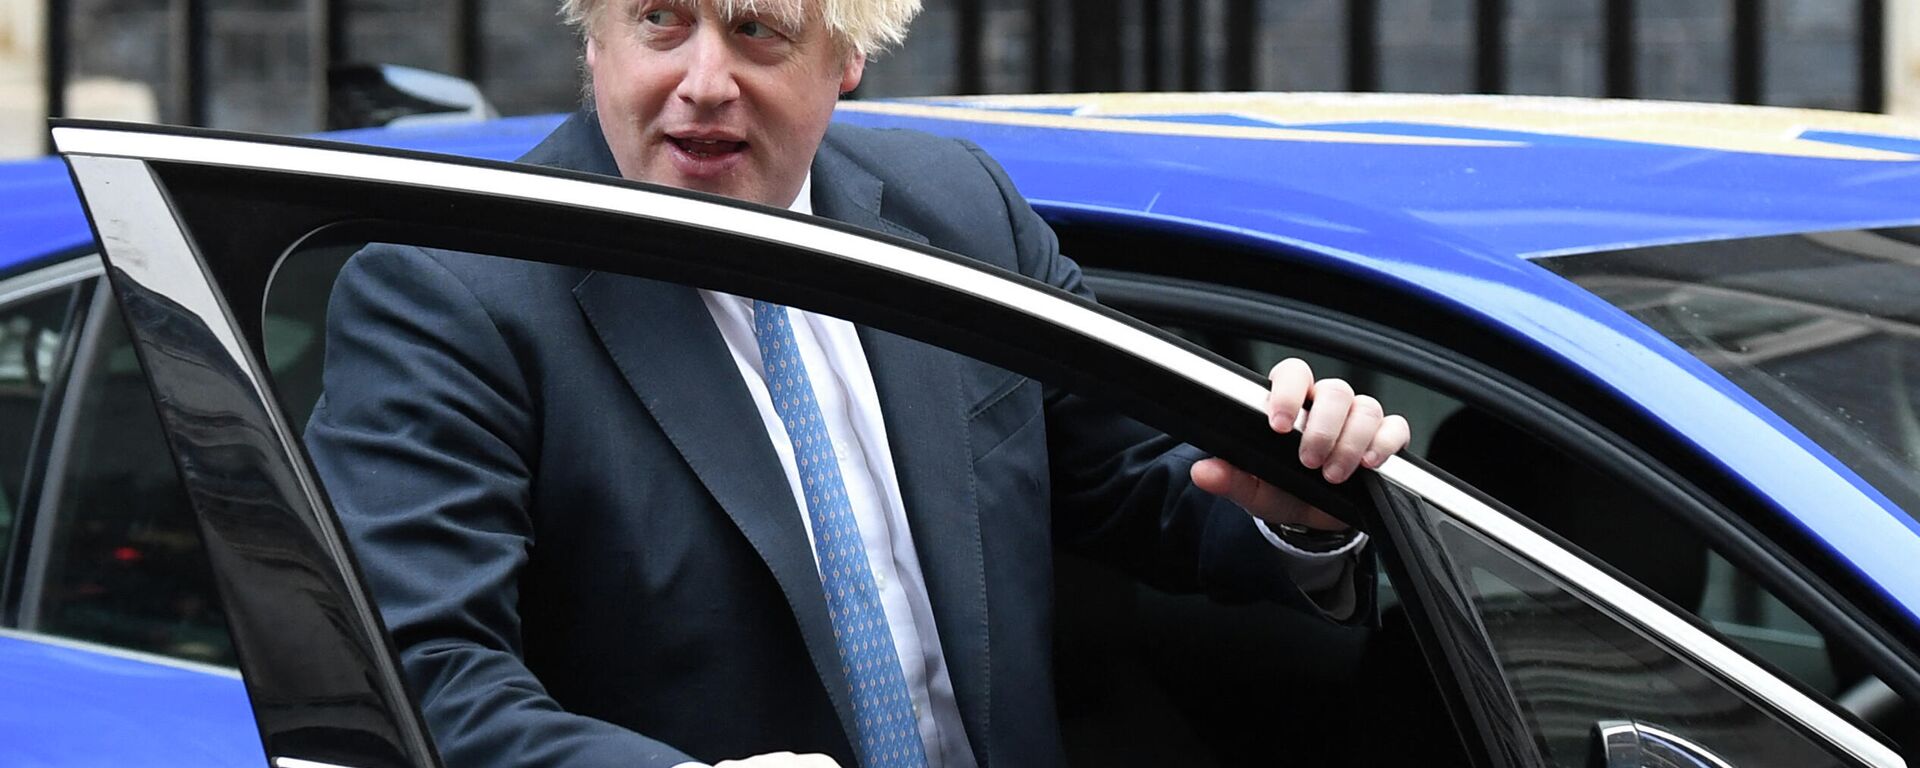 Britain's Prime Minister Boris Johnson gets into an electric vehicle during a meeting with Small Business Saturday entrepreneurs in Downing Street in central London on December 1, 2021 - Sputnik International, 1920, 13.12.2021